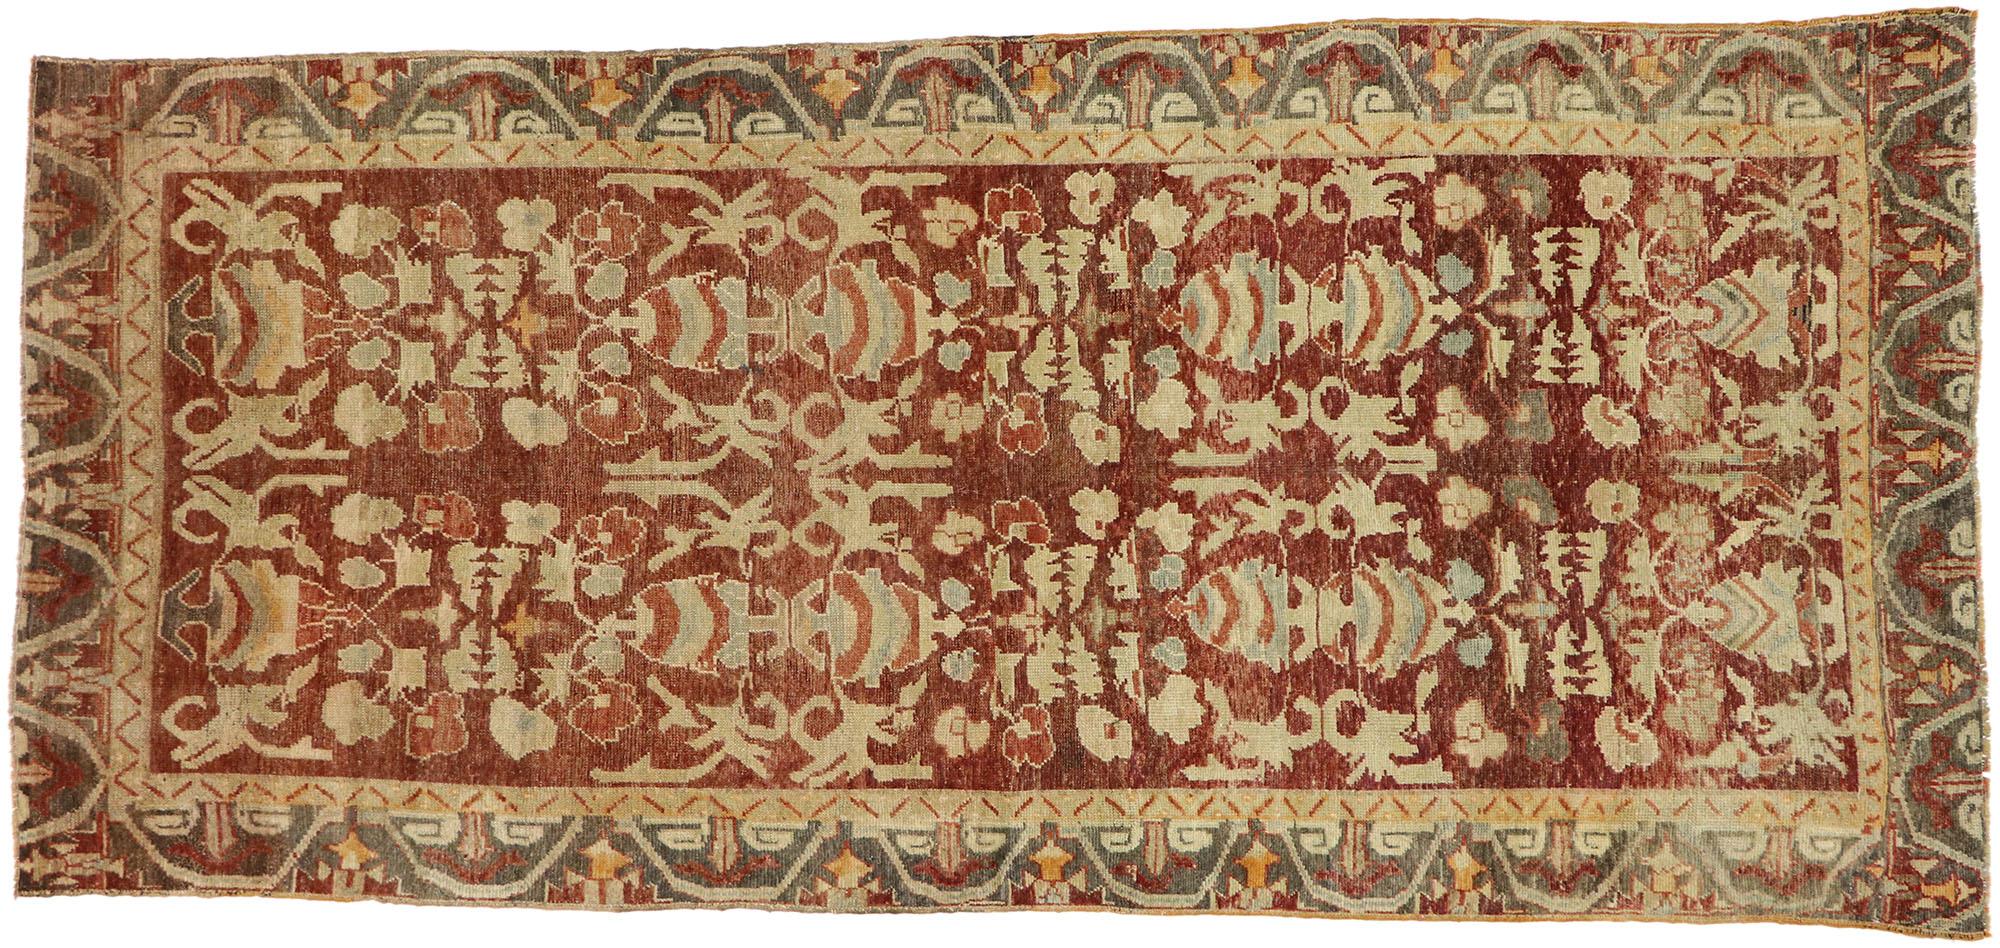 52253 Vintage Turkish Oushak Gallery Rug with Traditional Style, Wide Hallway Runner 04'08 x 10'04. Warm and inviting, this hand-knotted wool vintage Turkish Oushak gallery rug features an all-over geometric botanical pattern arranged in two